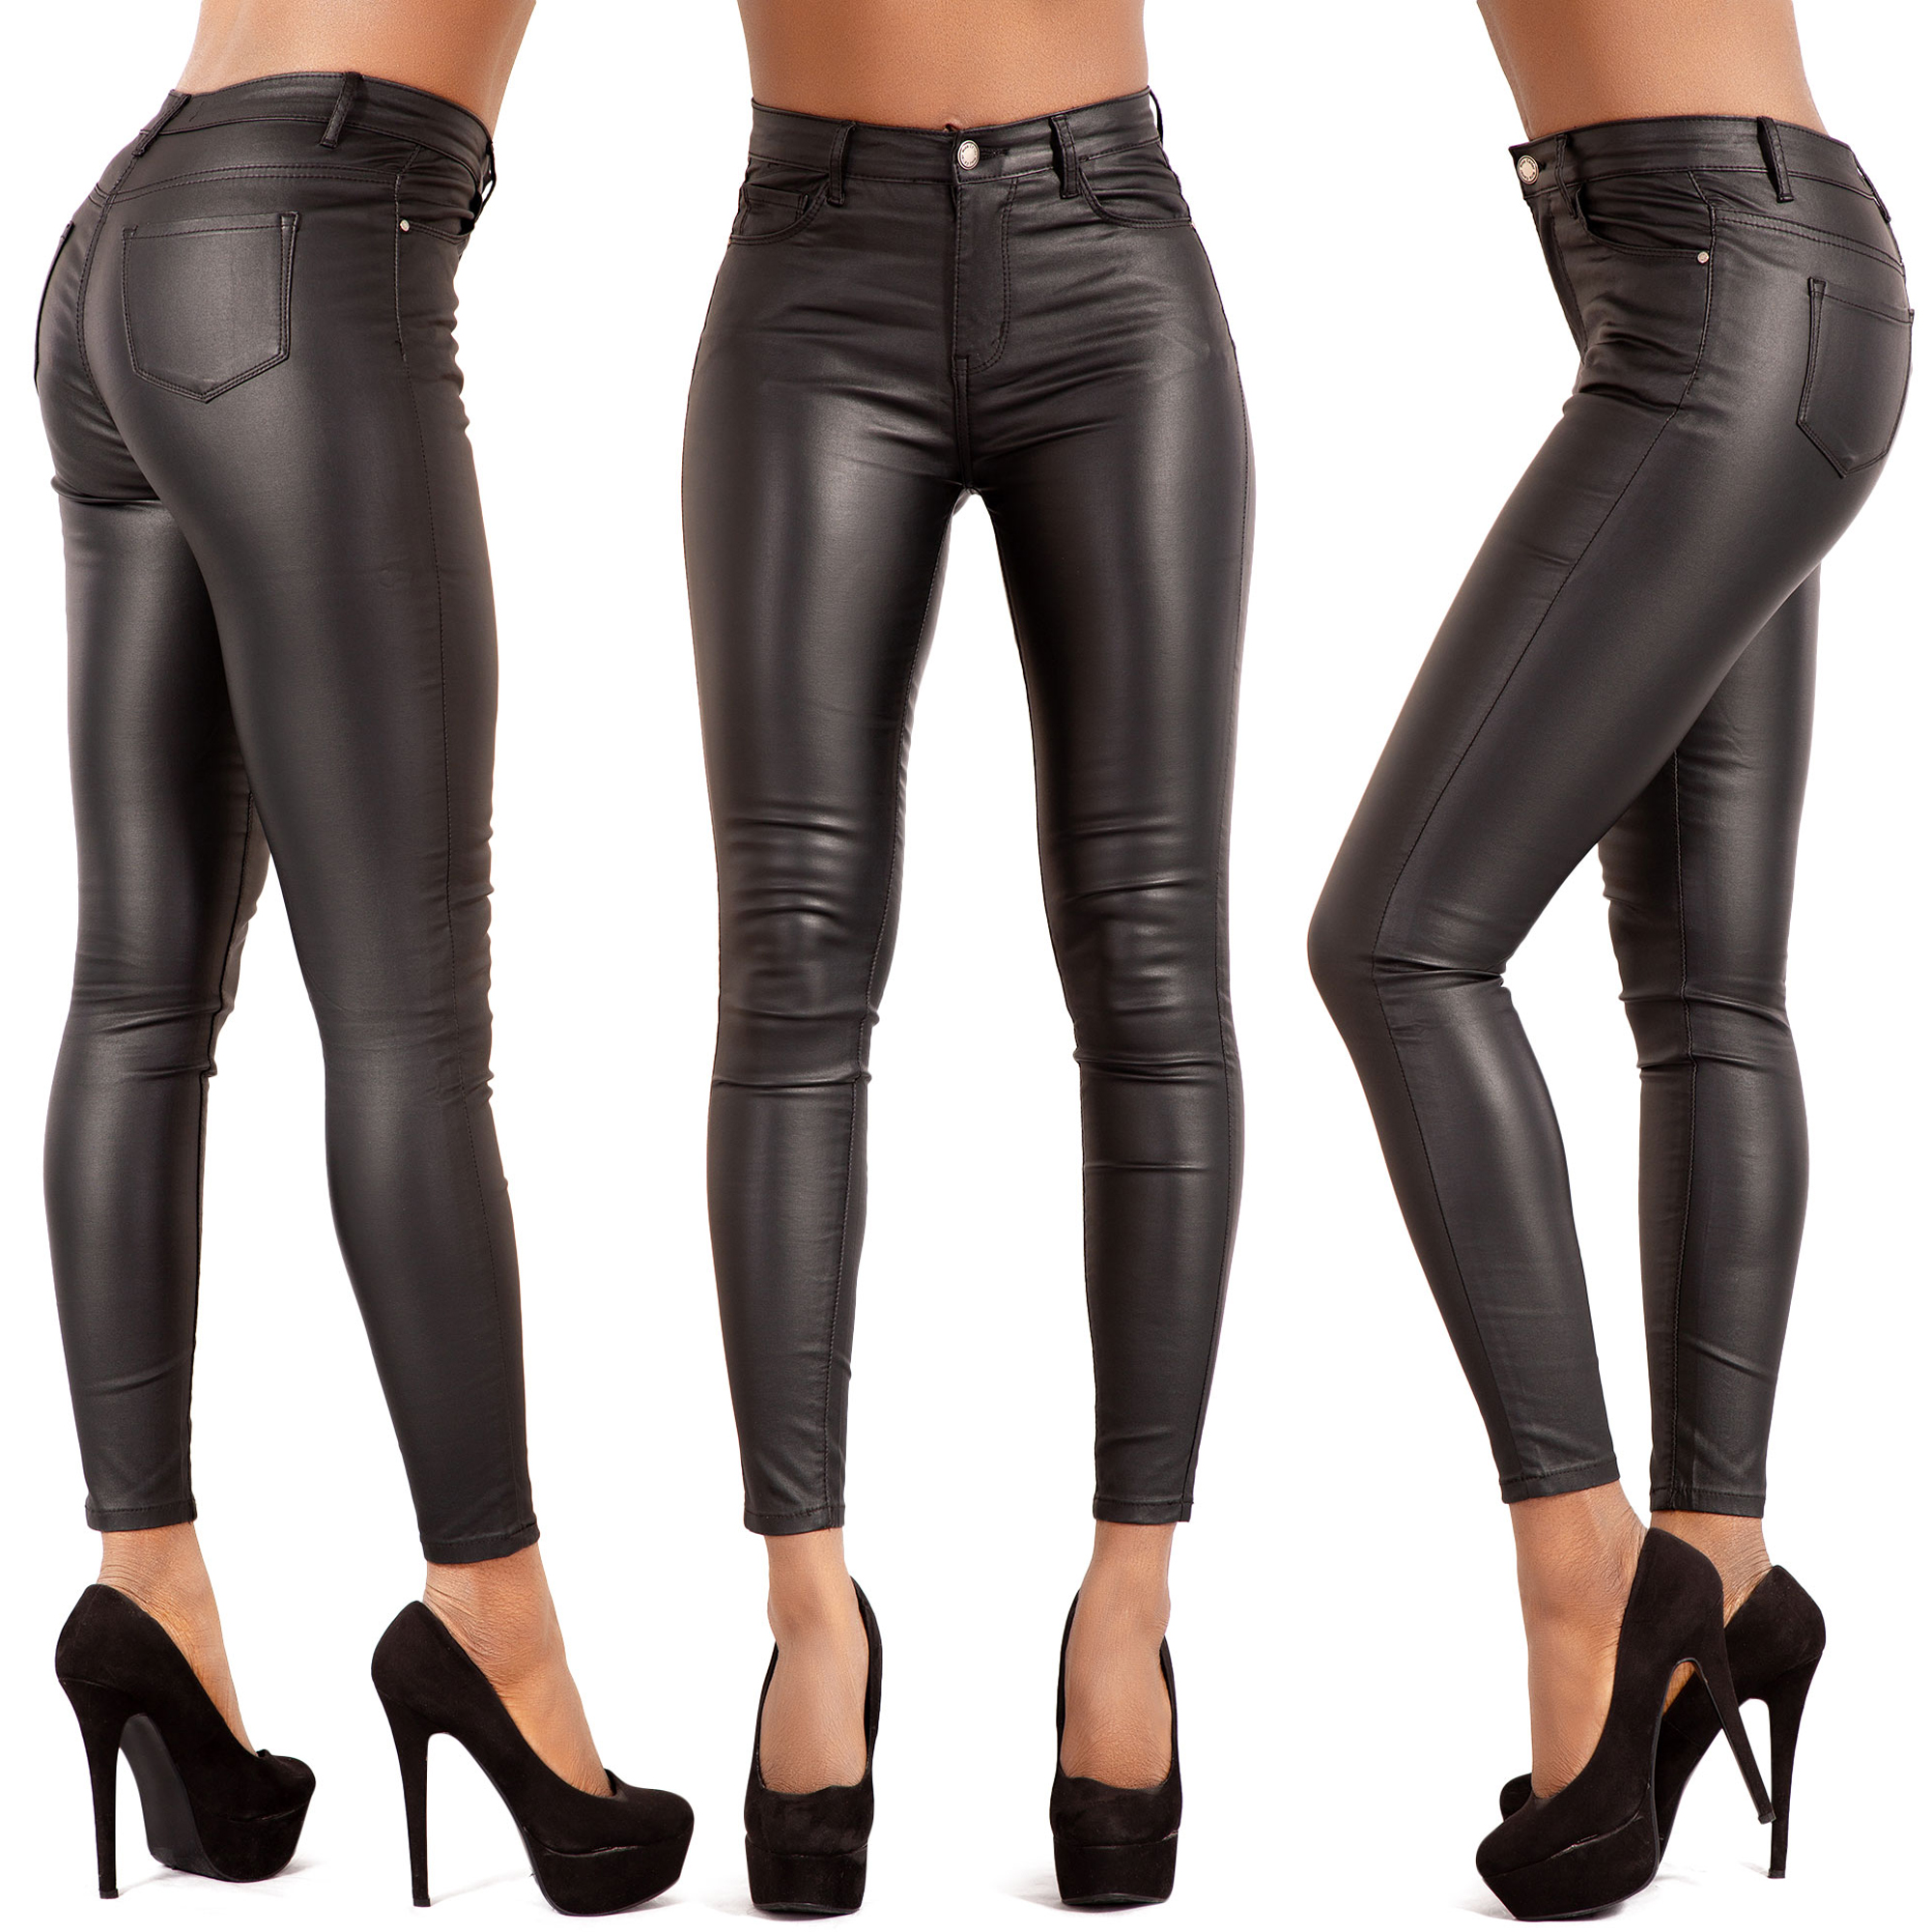 COUTEXYI Hot Sexy Women Gothic Leggings Wet Look PU Leather Leggings Black  Slim Thin Long Pants Ladies Skinny Leggings Stretchy Plus Size